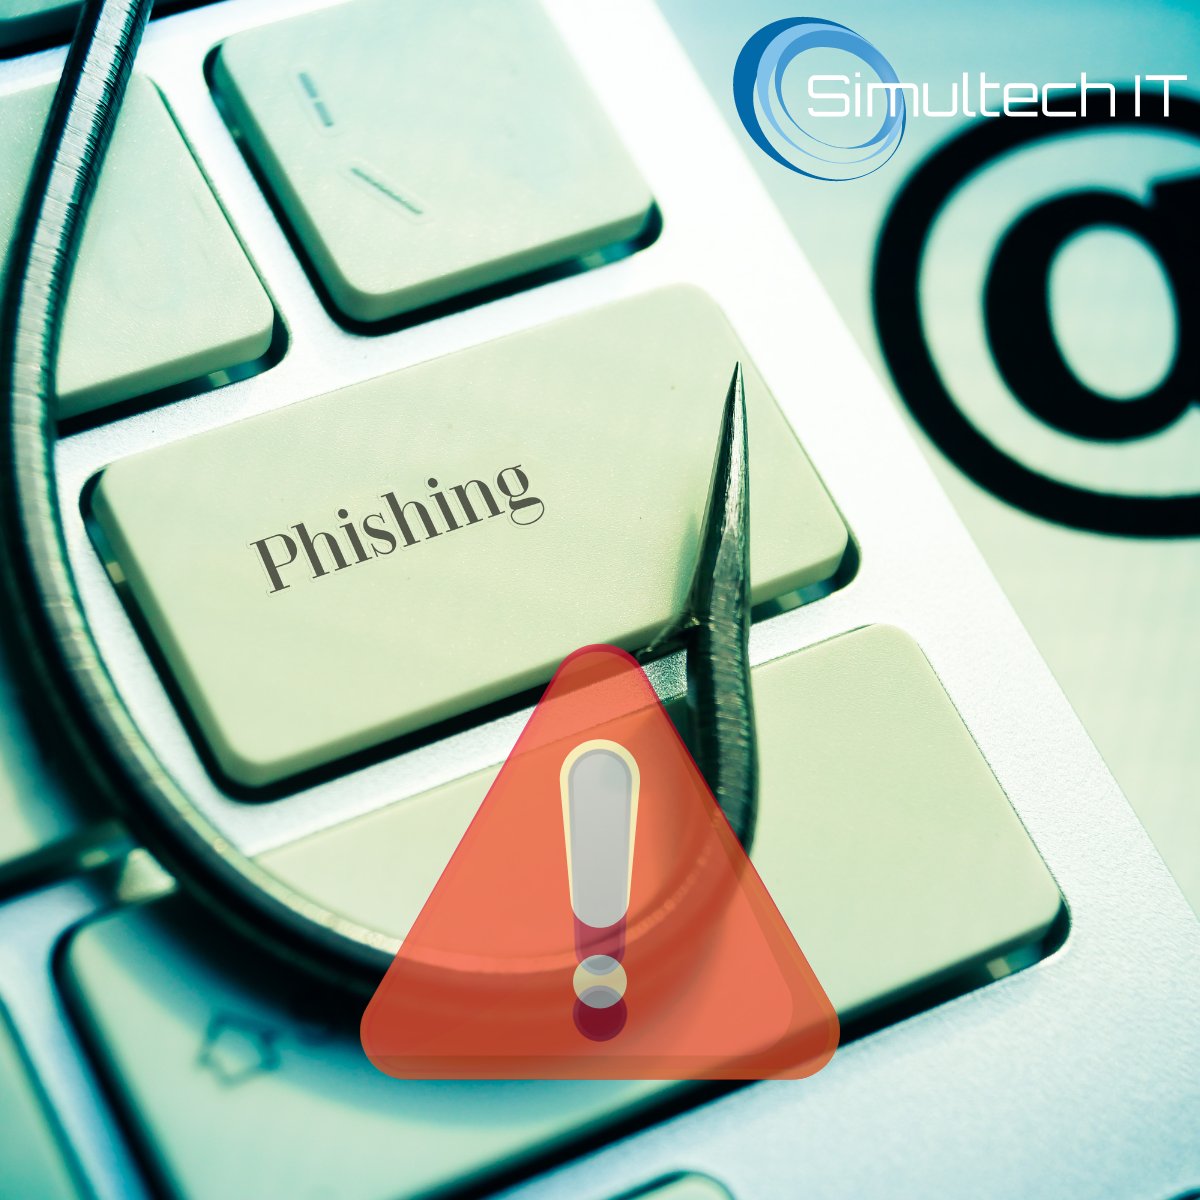 🎣 Phishing Tips: Stay Safe! 1) Verify links & sender details—look fishy? Avoid! 🕵️‍♂️ 2) Odd requests? Pause & ponder before proceeding. Don't take the bait! 🤔 #SafeClicking #ThinkBeforeYouLink #UKBiz